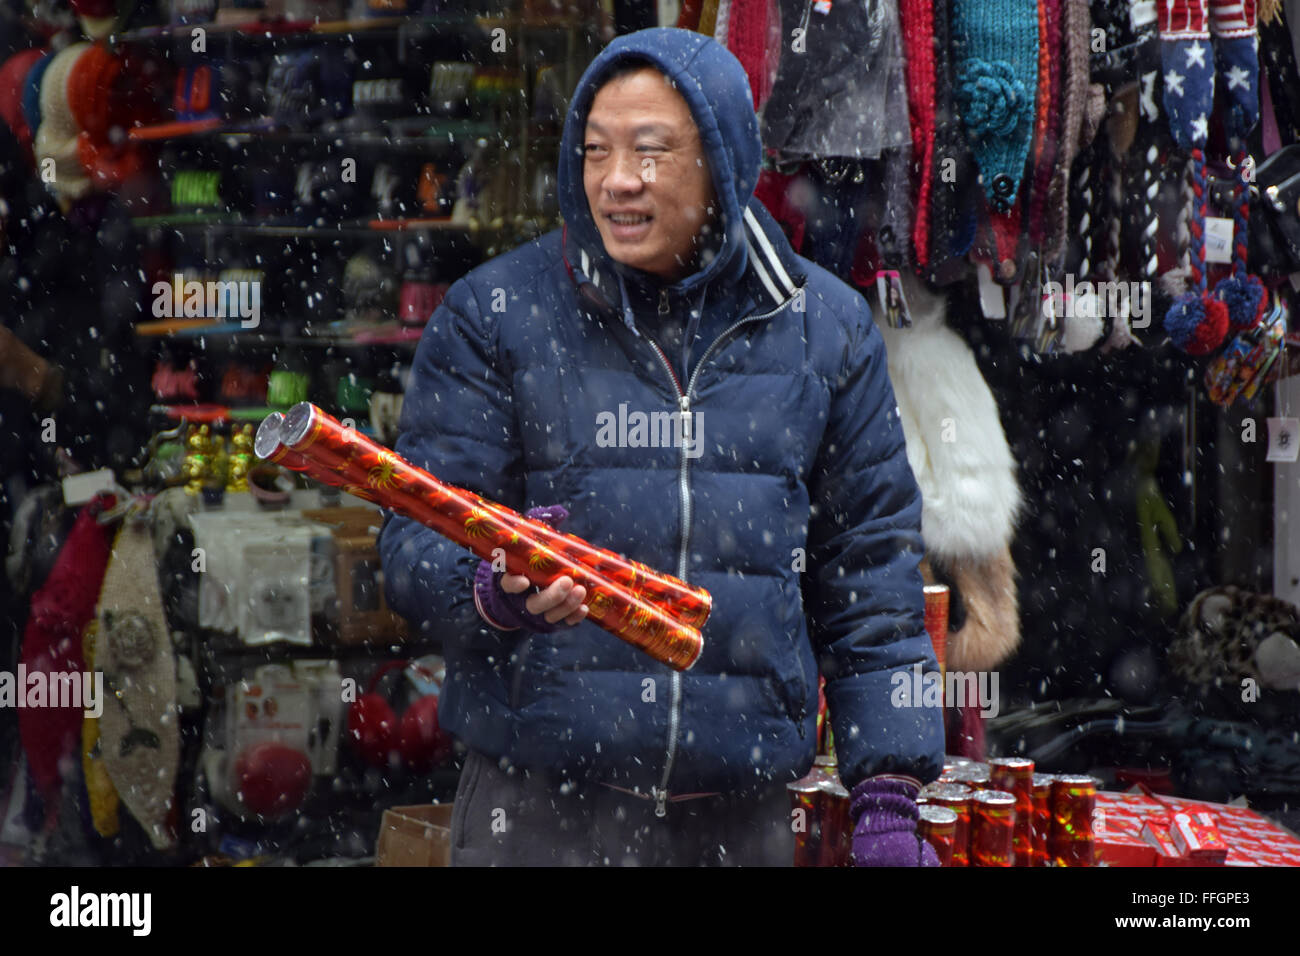 A Chinese businessman selling confetti blowers in the snow for the Chinese New Year's Parade. On Mott Street in Chinatown, NYC Stock Photo